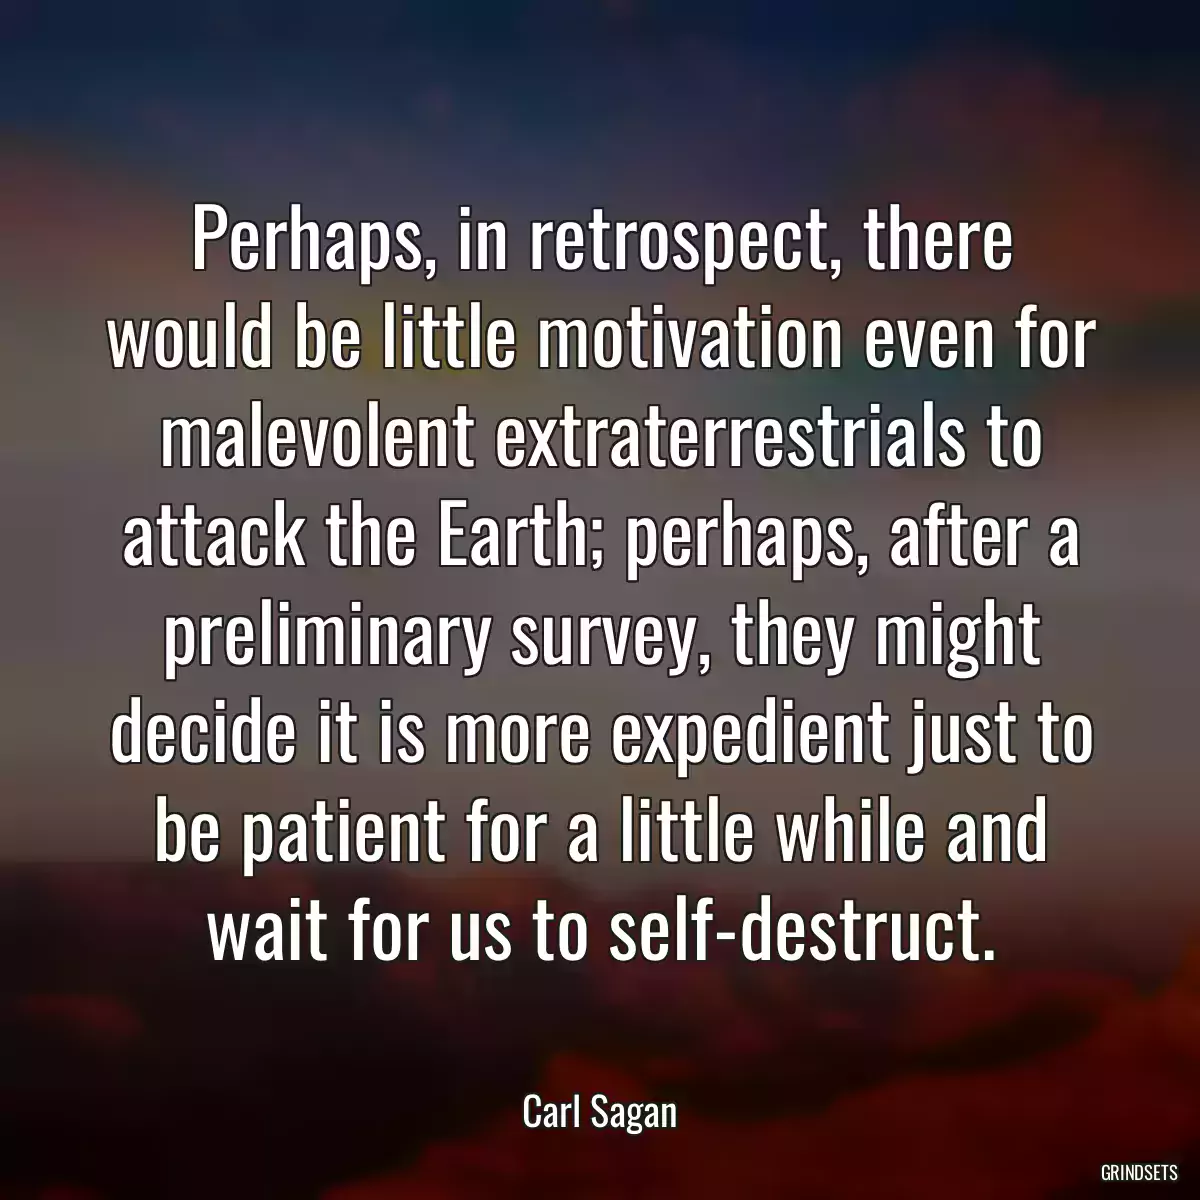 Perhaps, in retrospect, there would be little motivation even for malevolent extraterrestrials to attack the Earth; perhaps, after a preliminary survey, they might decide it is more expedient just to be patient for a little while and wait for us to self-destruct.